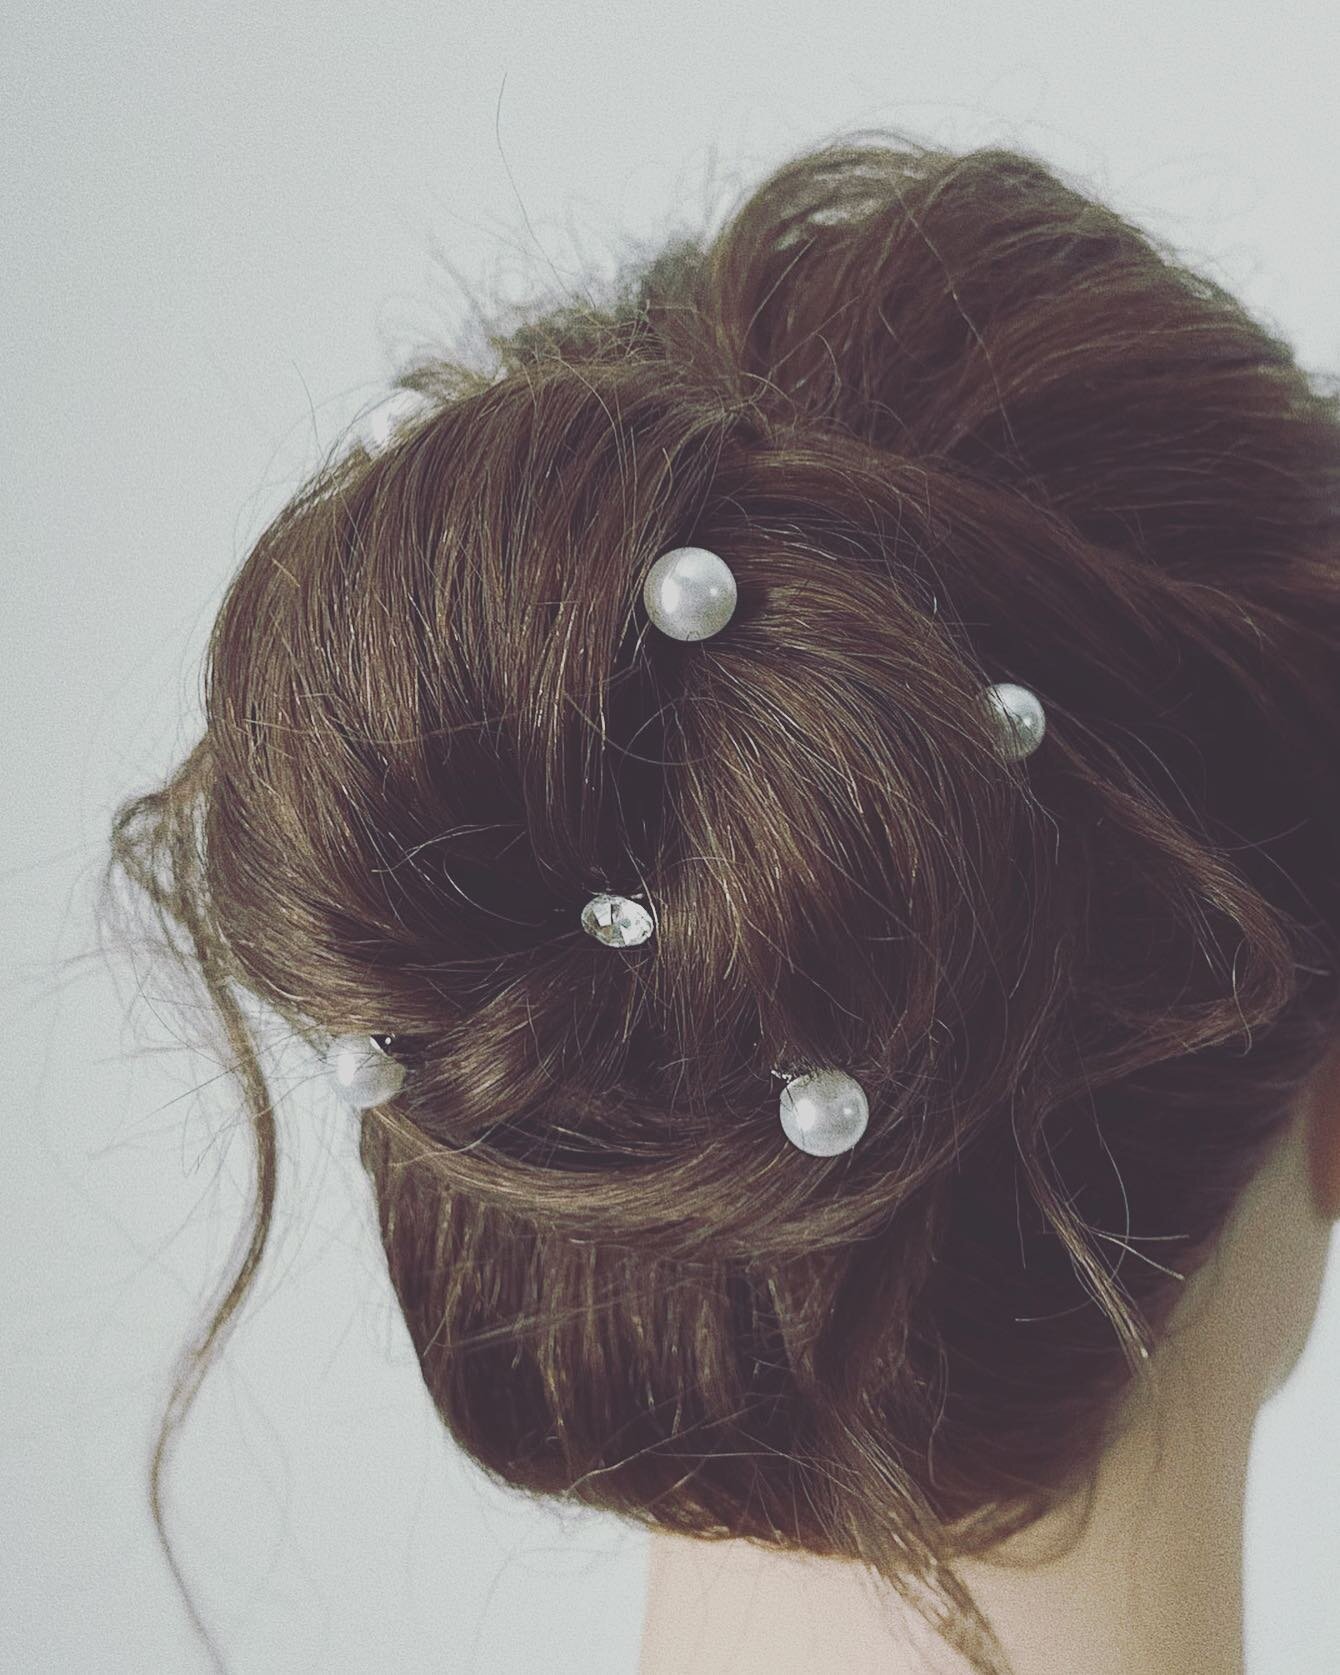 Effortless&hellip;simple&hellip;classic. No such thing as a boring updo, especially with hints of pearls. 

#yychair #yychairstylist #calgaryhair #calgaryhairstylist #yycpearlsinhair #yycupdo #yycbridalhair #bridalhair #yycbridalupdo #bridalhairstyle